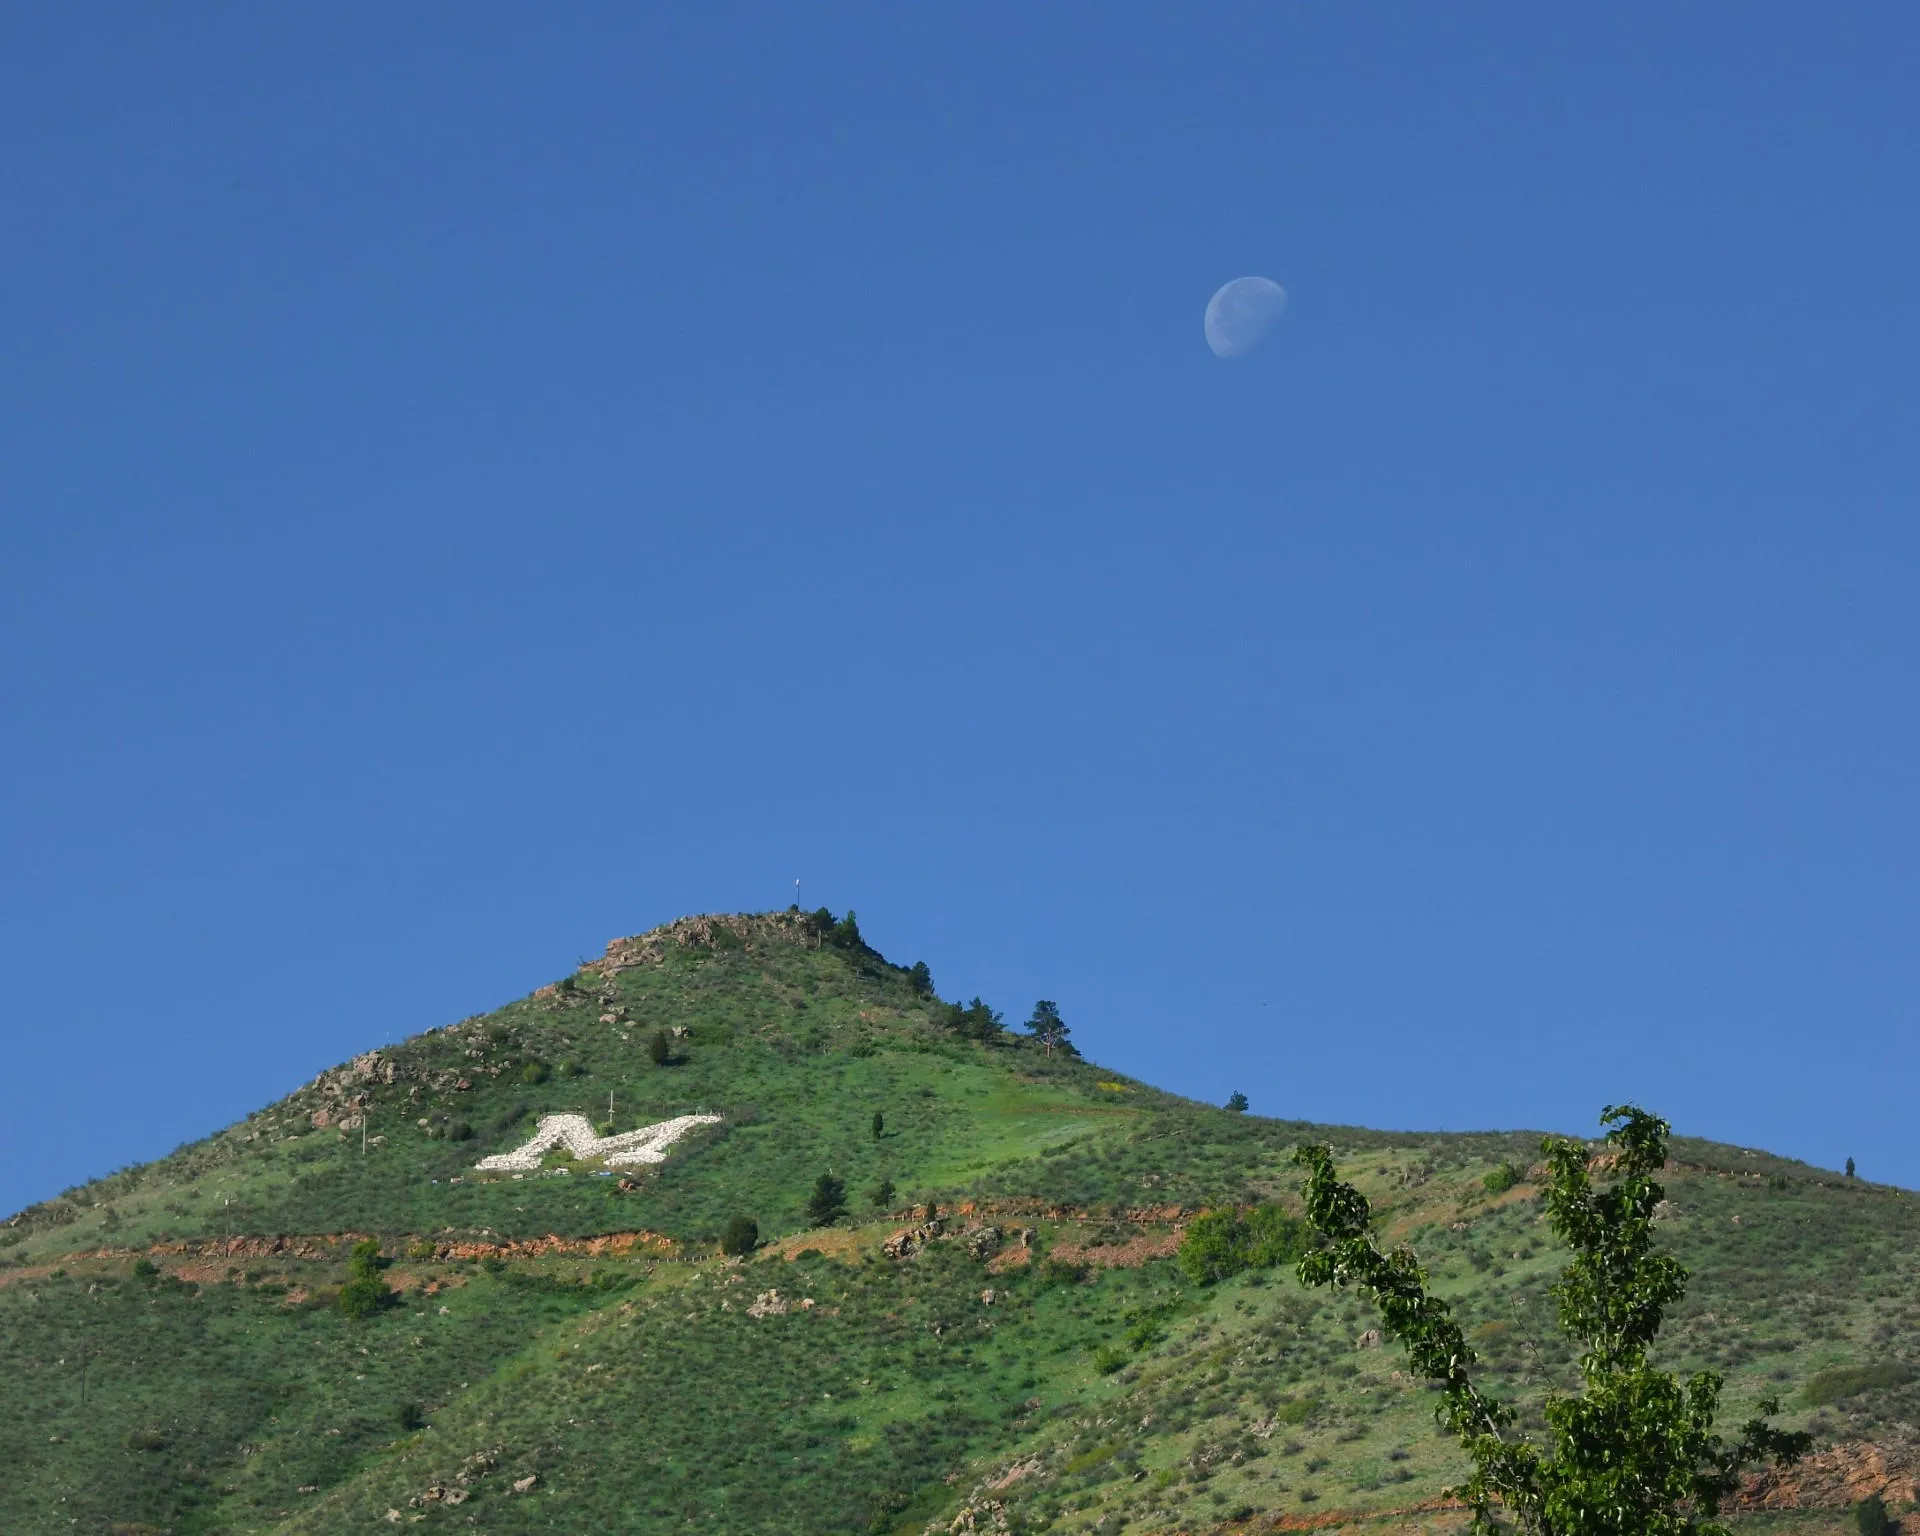 Mount Zion looking exceptionally green with a faint half moon overhead